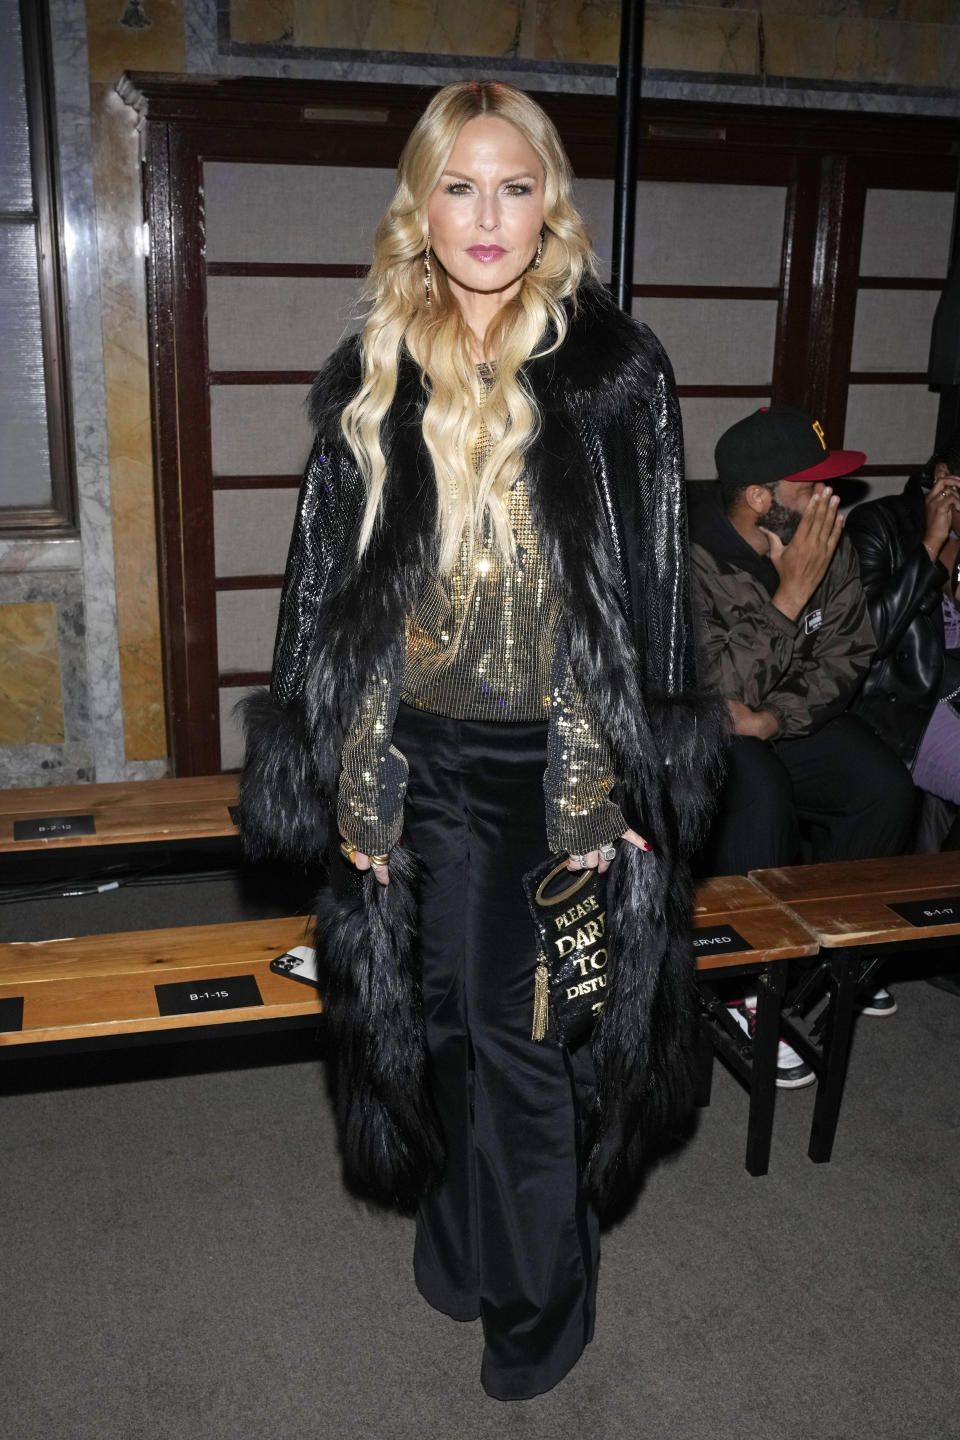 Rachel Zoe attends the Prabal Gurung Fall/Winter 2023 fashion show at Gotham Hall on Friday, Feb. 10, 2023, in New York. (Photo by Charles Sykes/Invision/AP)